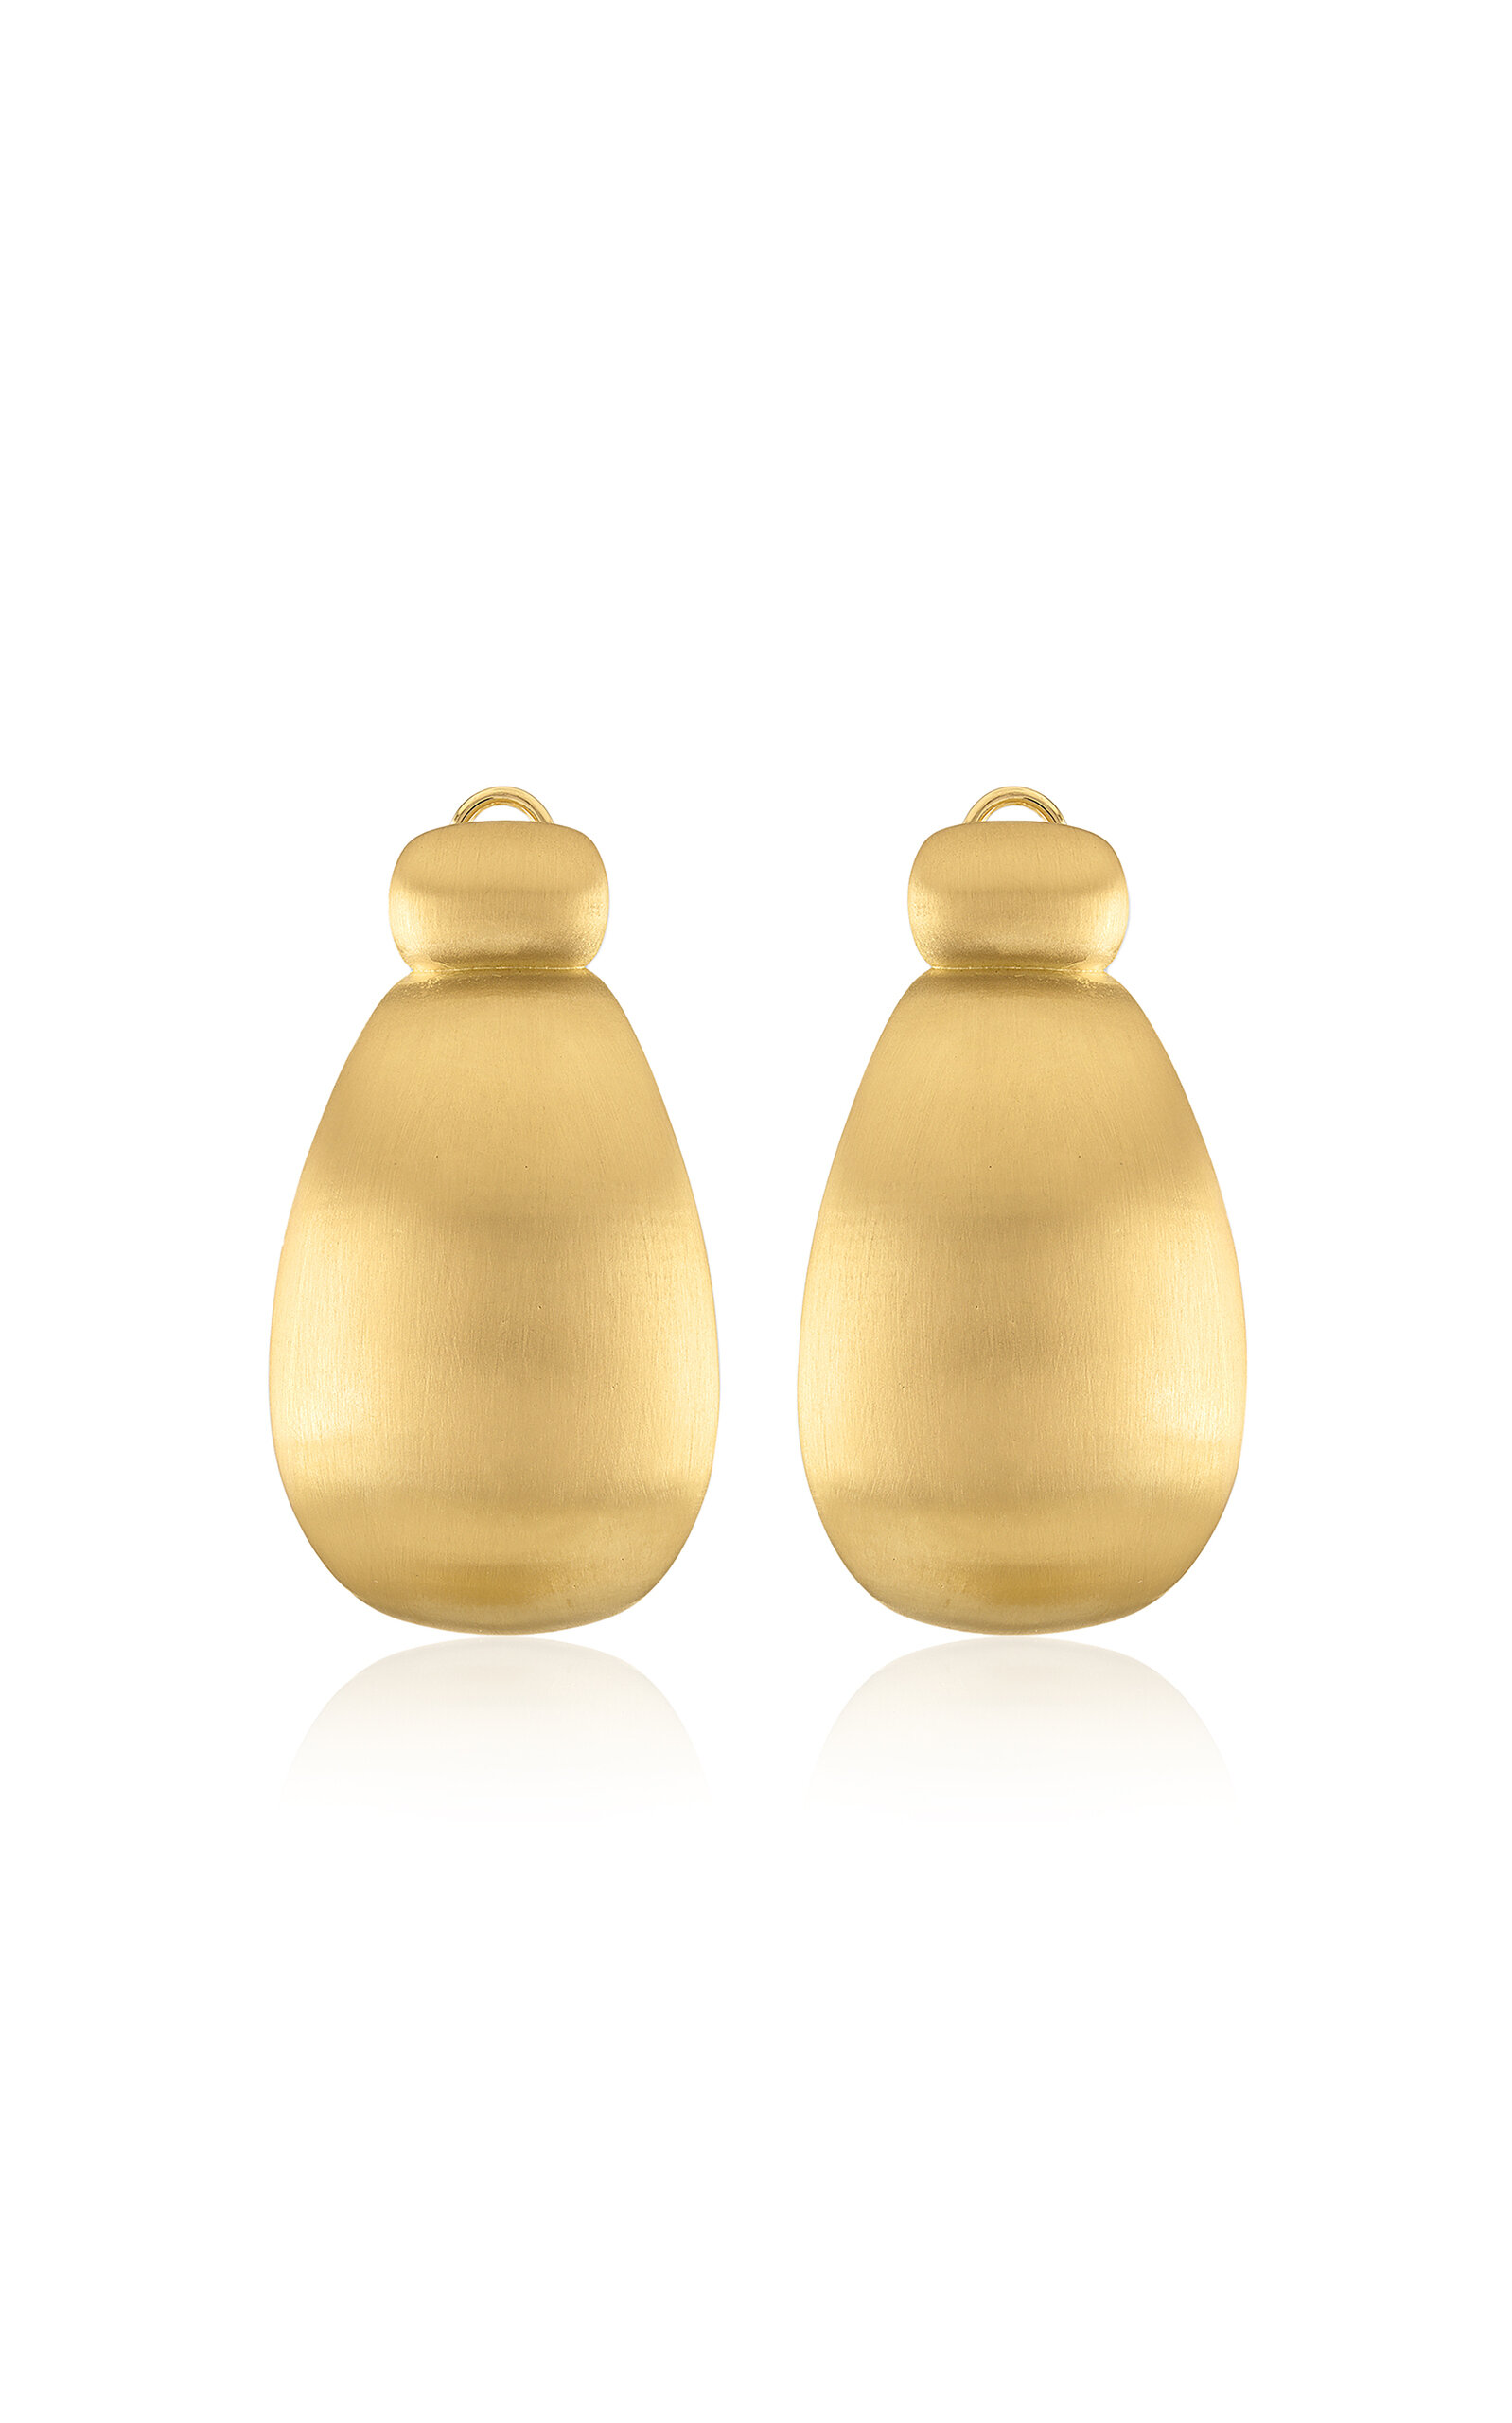 18k Yellow Gold Large Cowbell Earrings